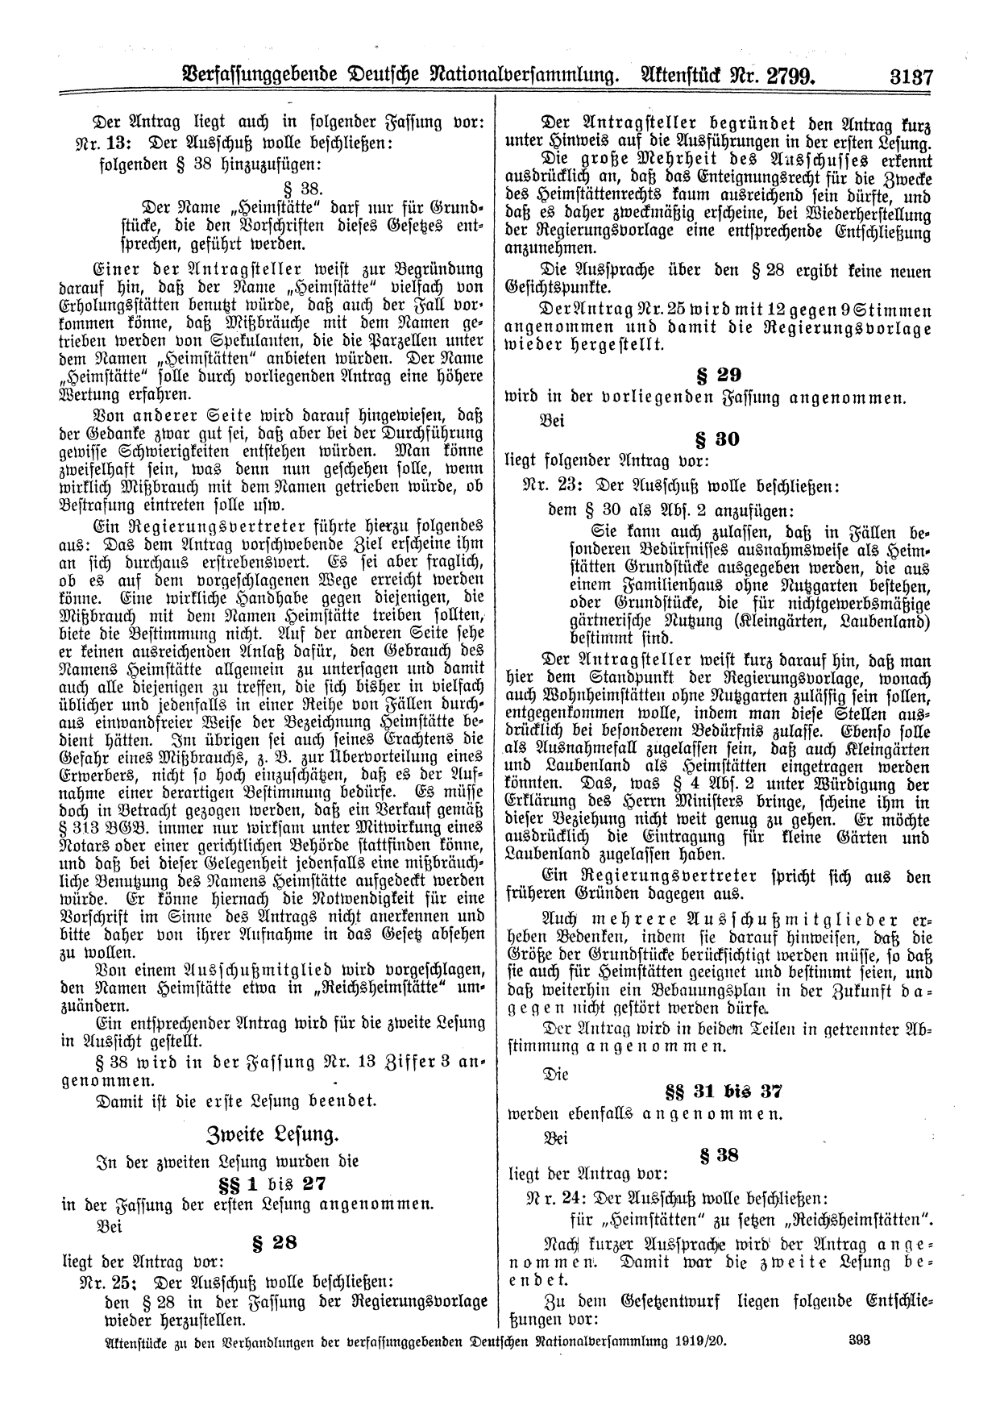 Scan of page 3137